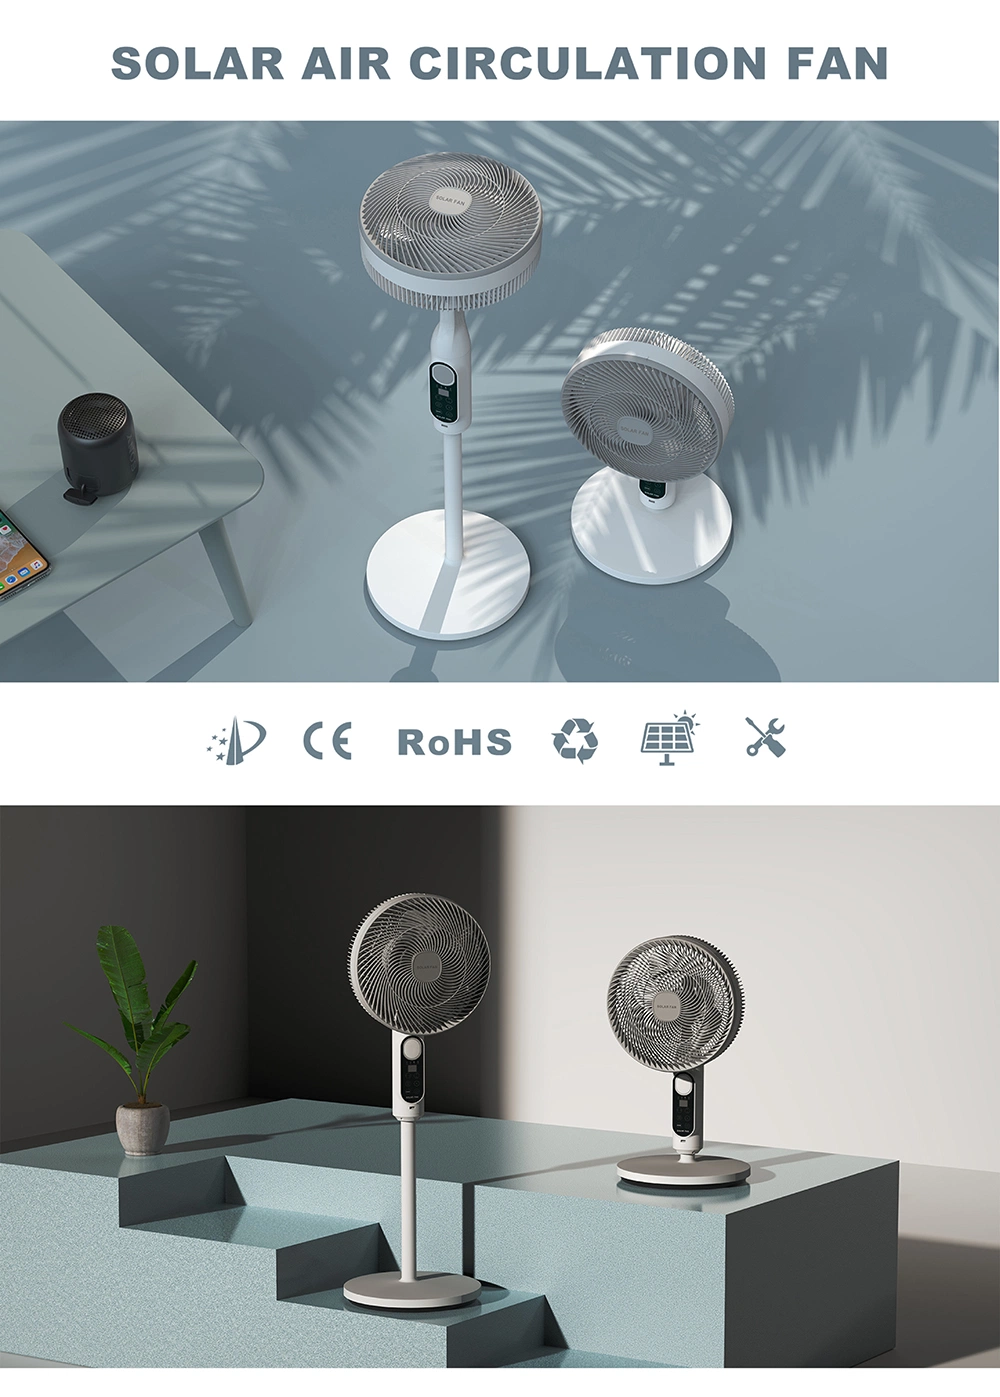 Sunc 14 Inch Pedestal Fan Low Noise Portable Solar Power Electric Floor Stand and Table Fan with Remote Control AC/DC Type